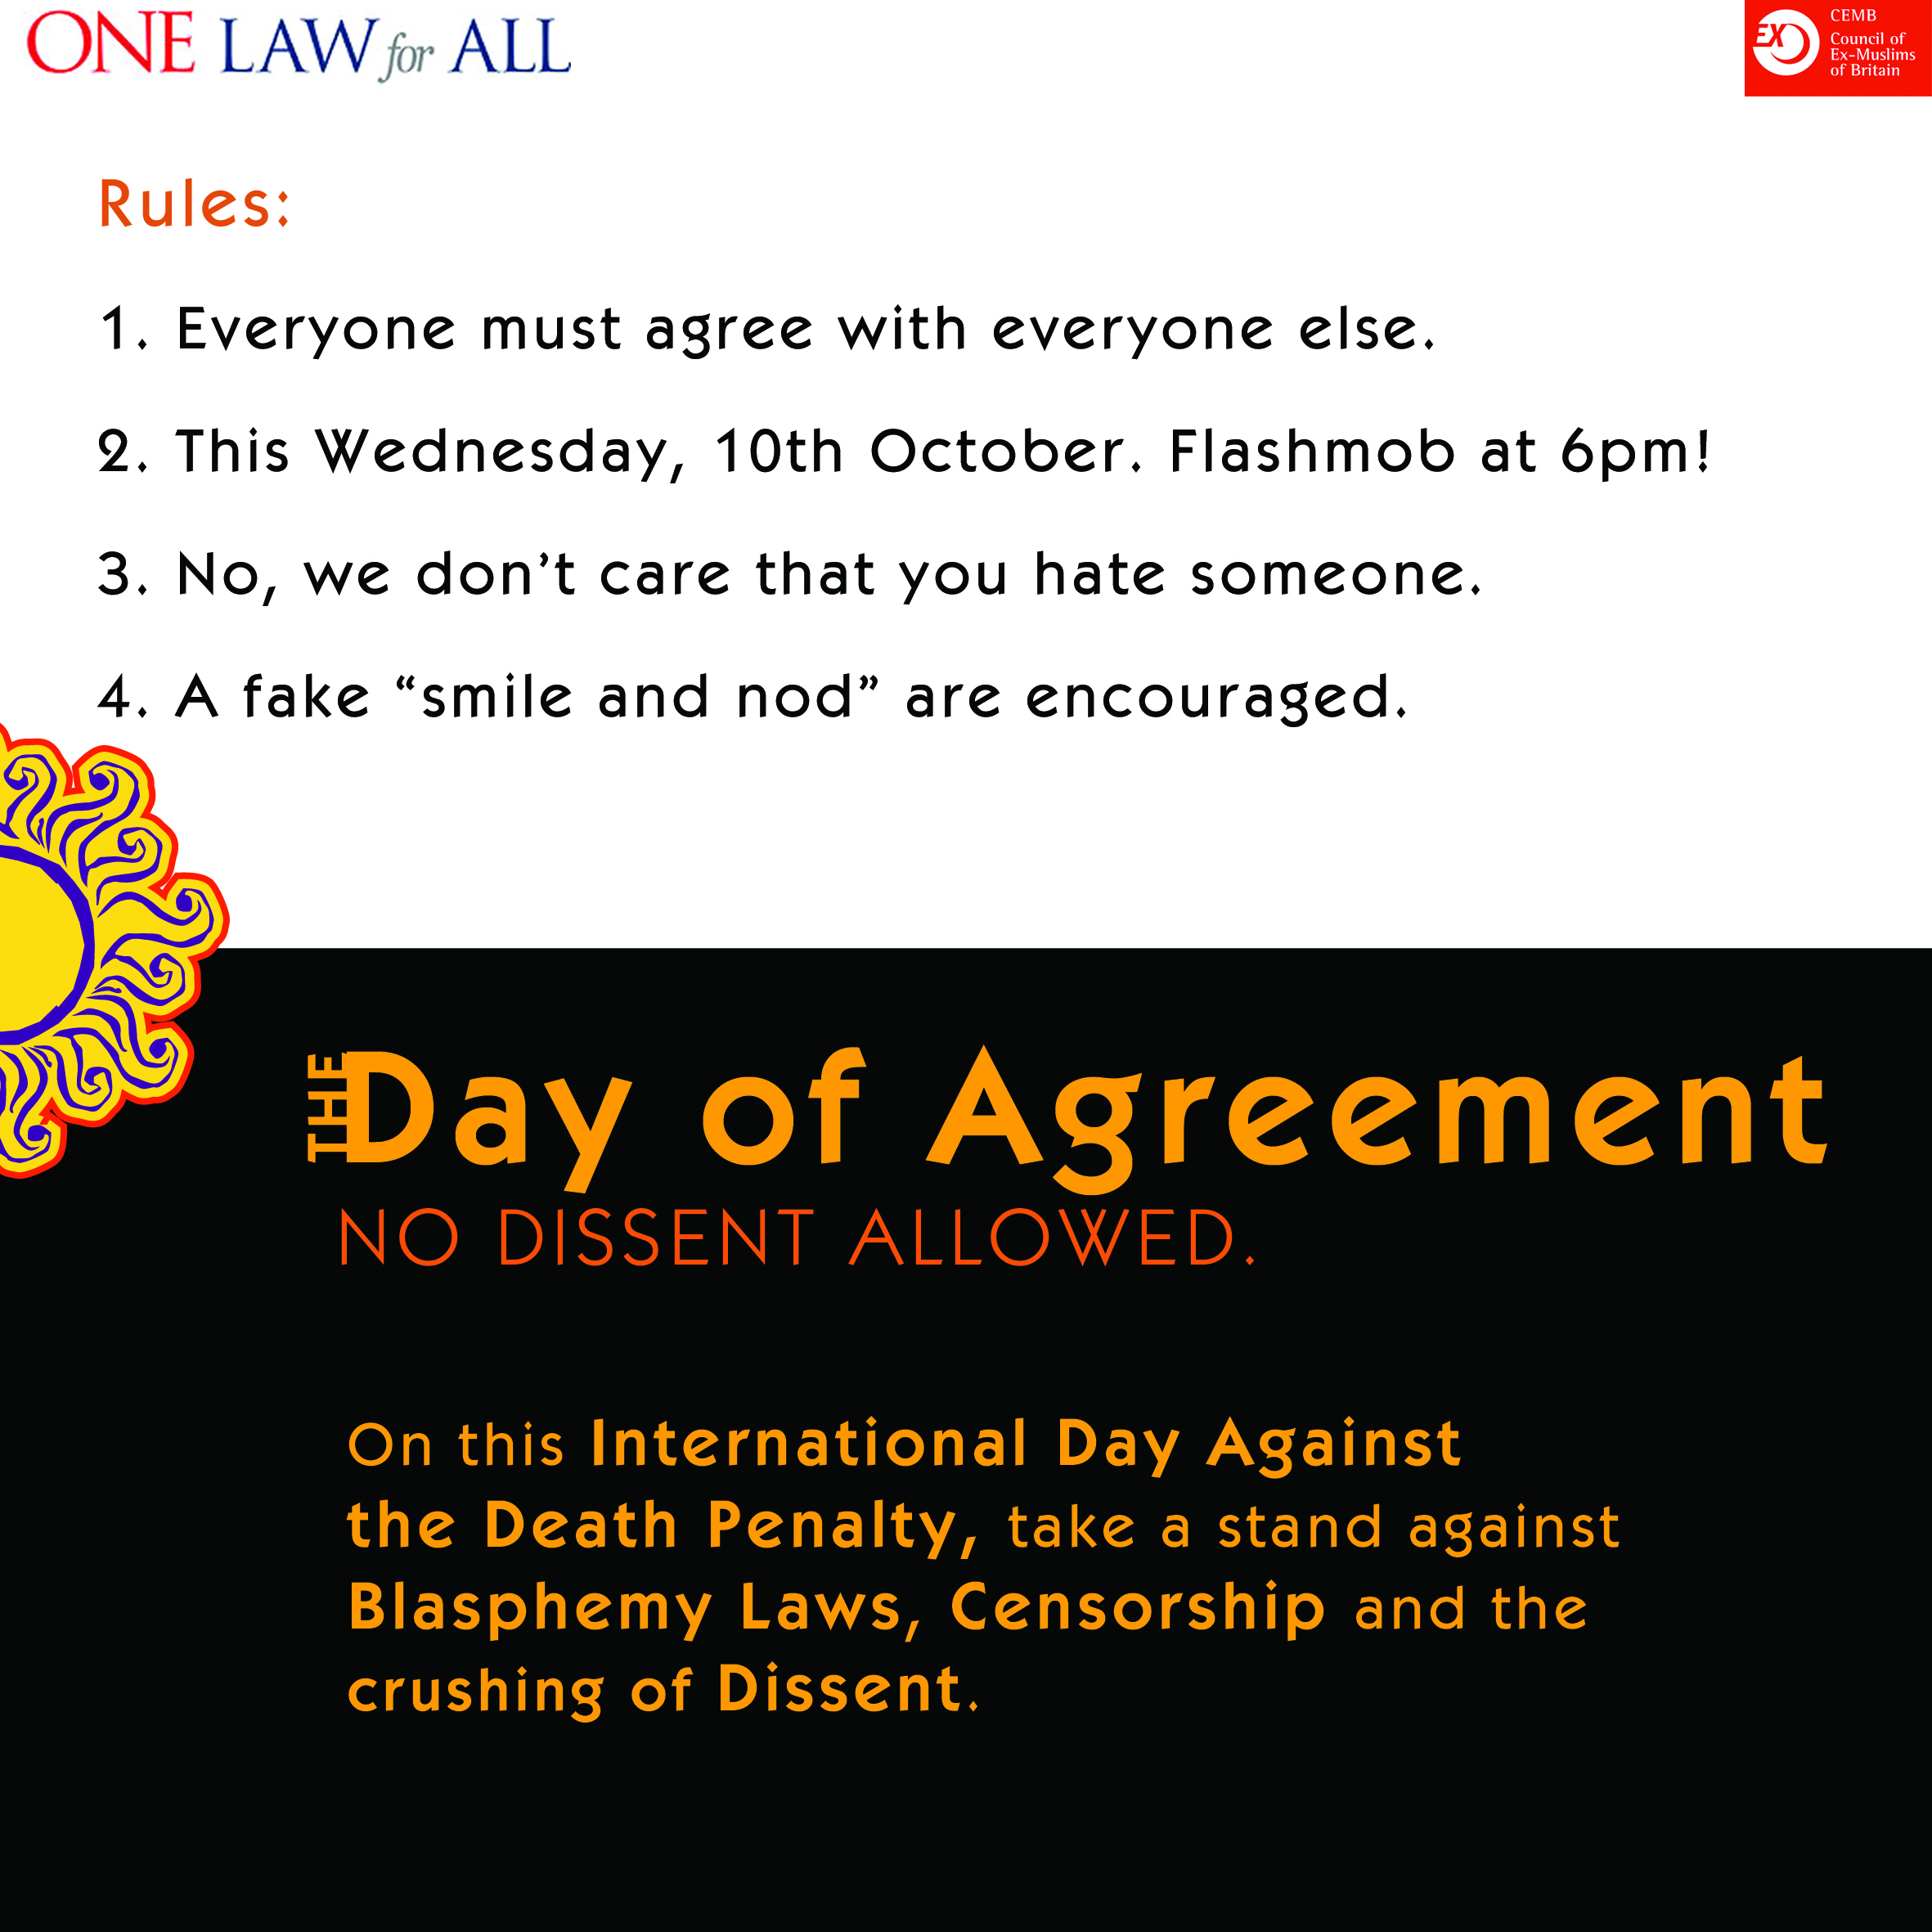 Day of Agreement